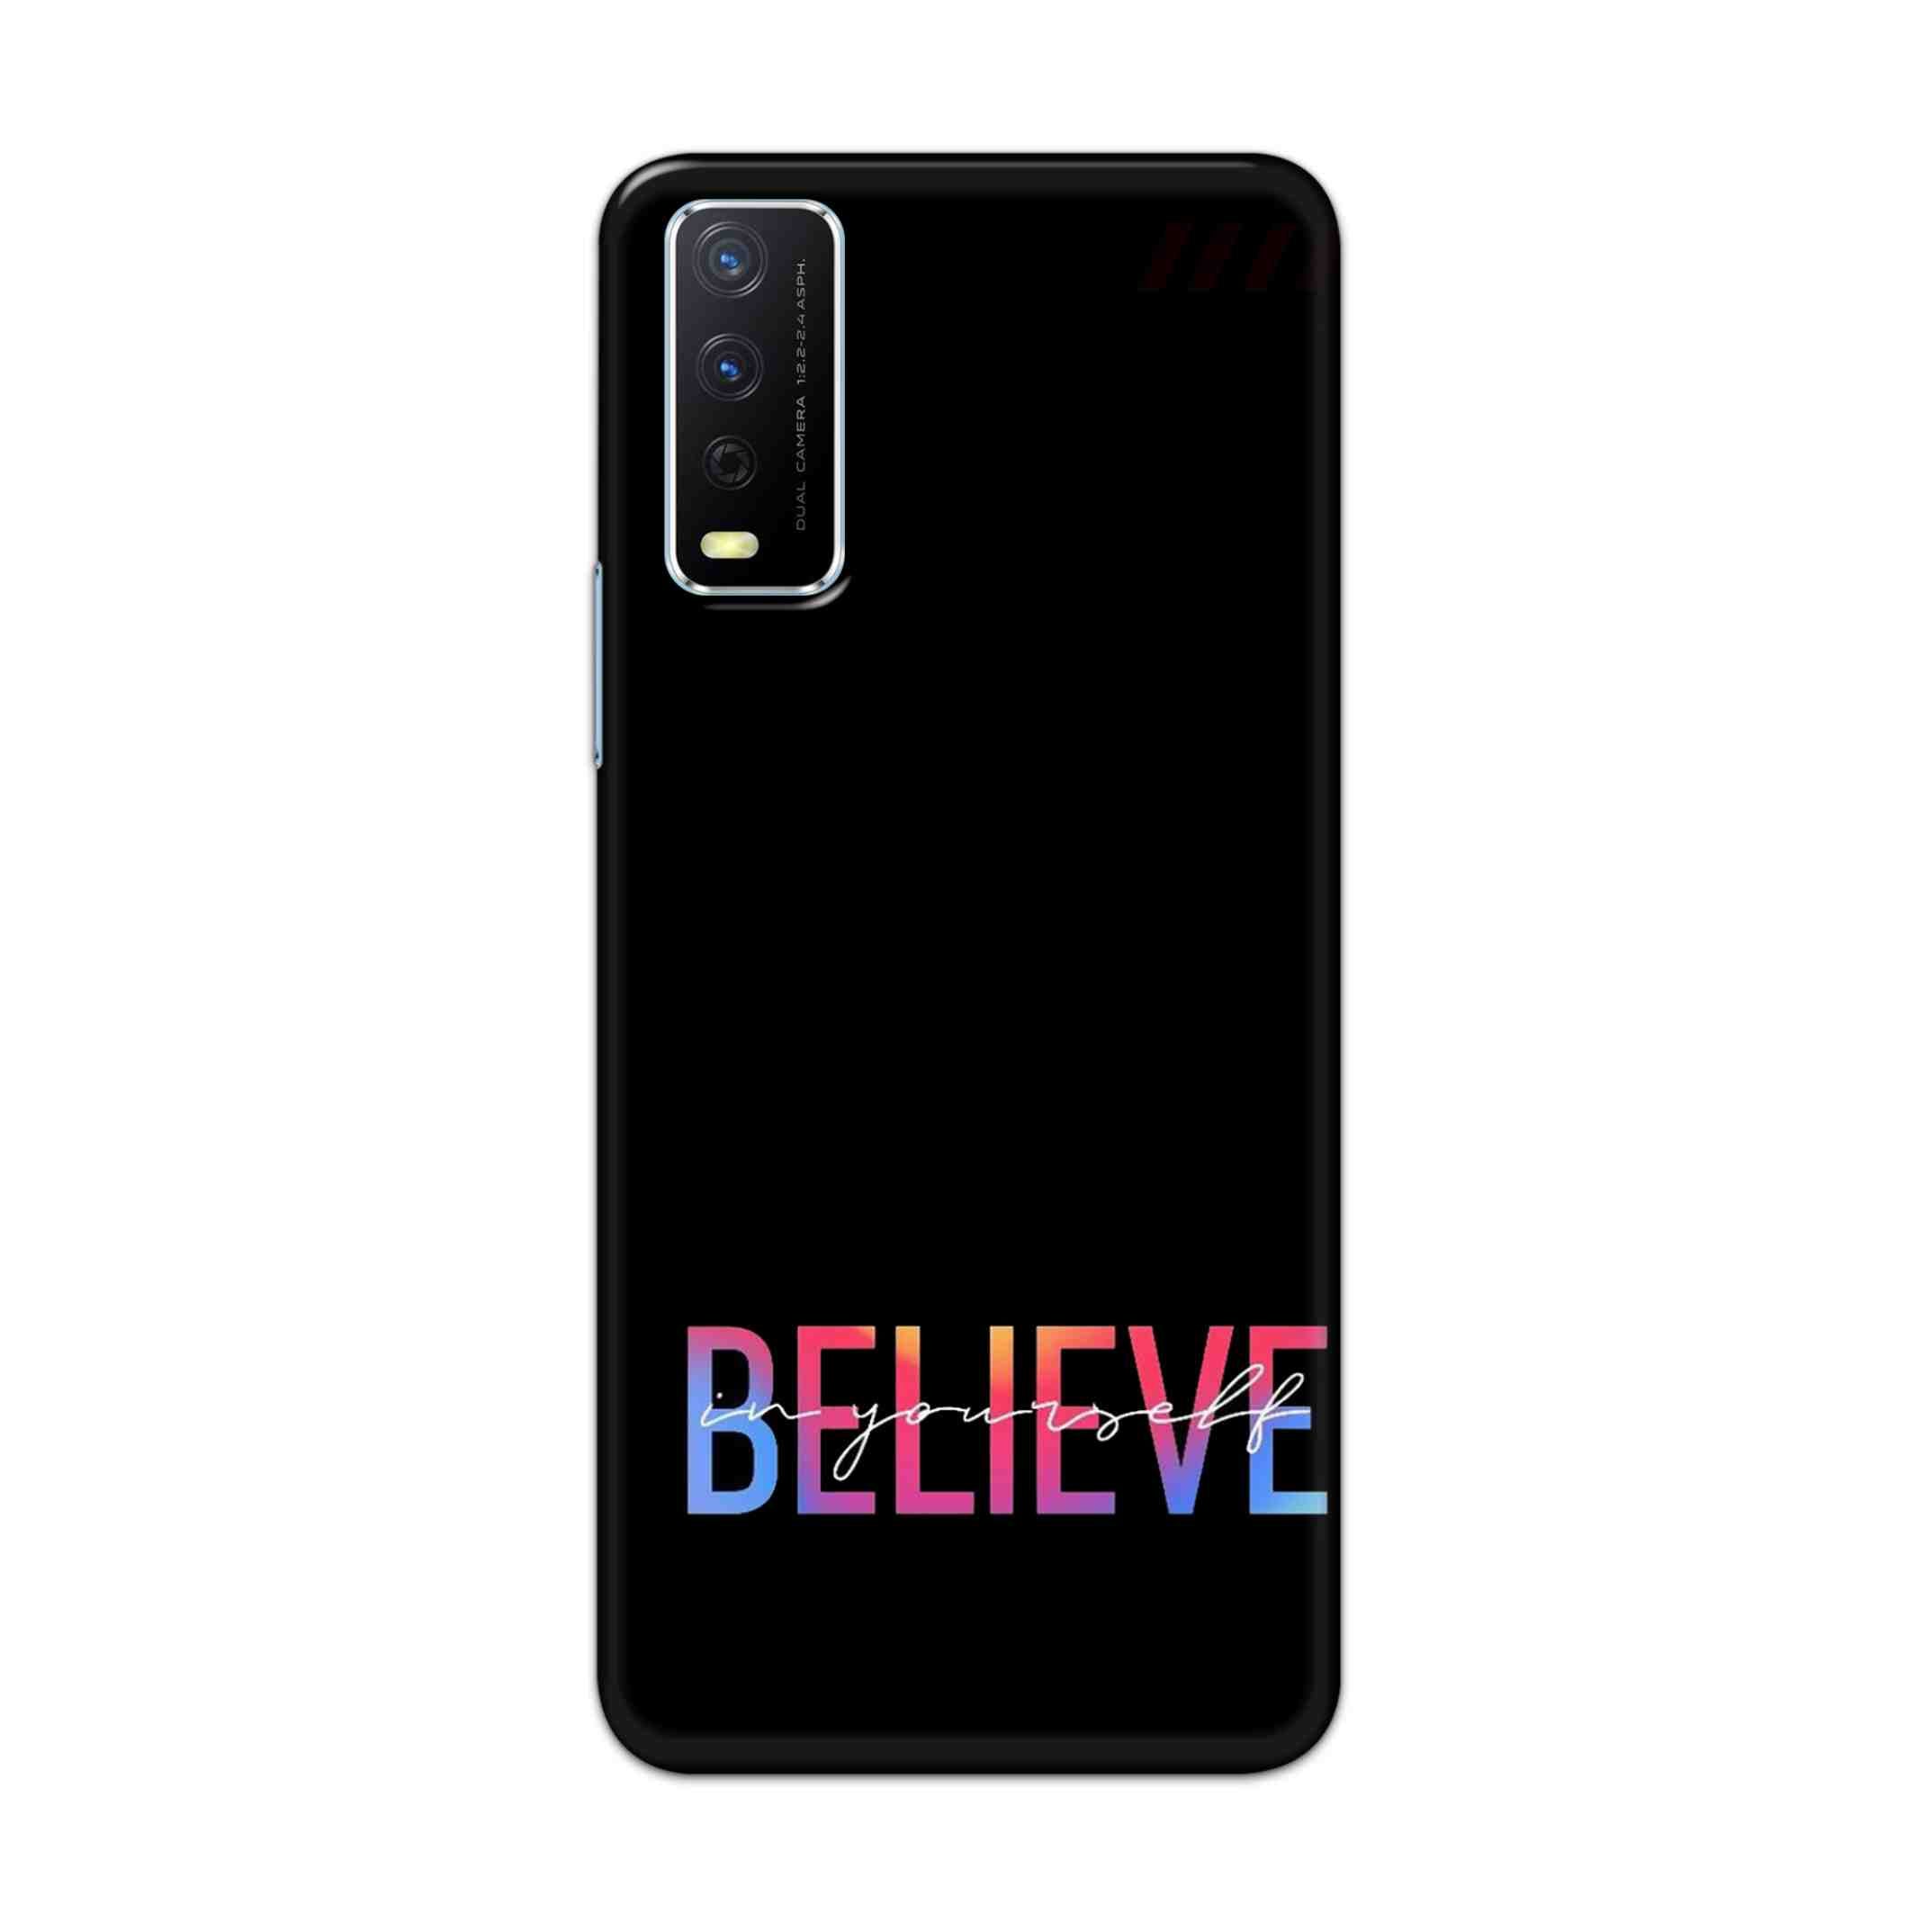 Buy Believe Hard Back Mobile Phone Case Cover For Vivo Y12s Online